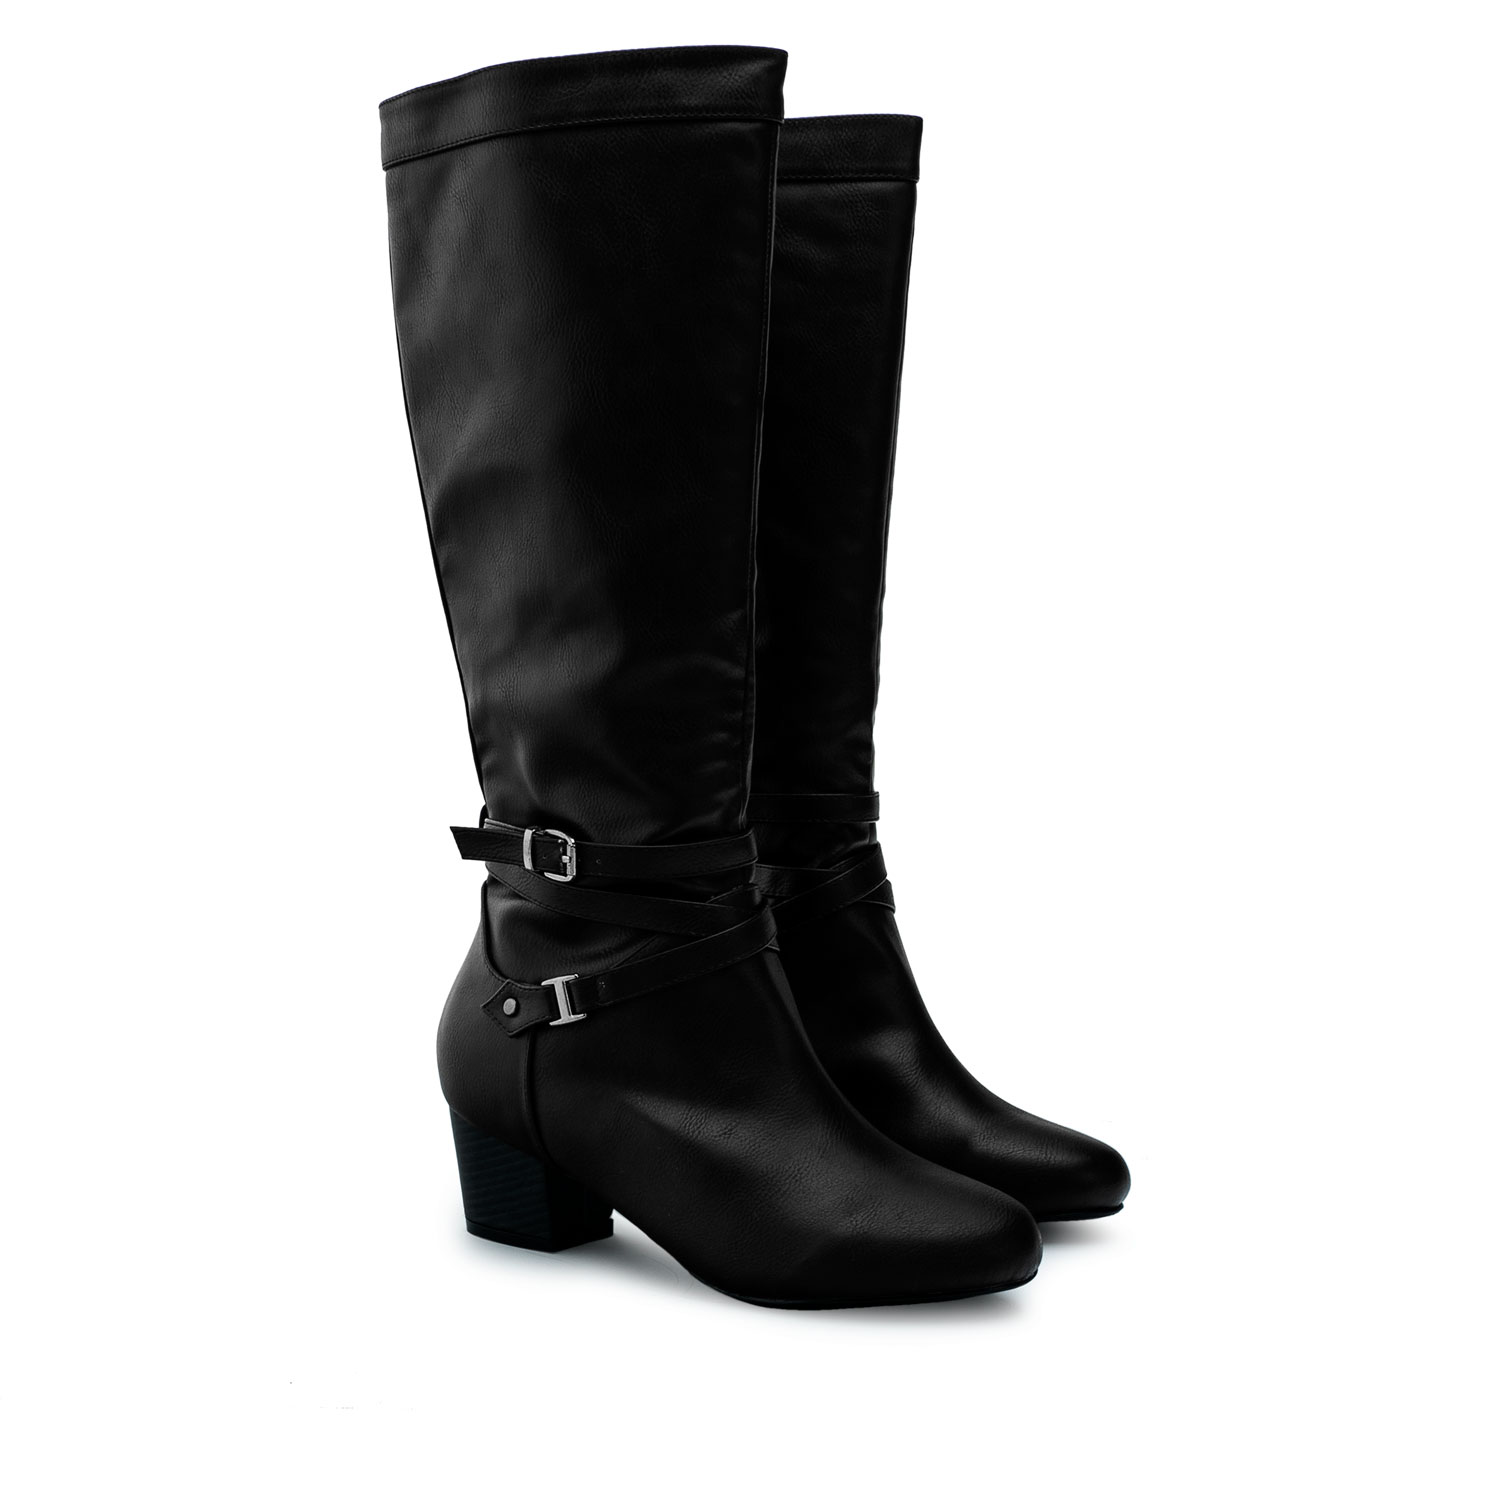 2-Buckled boots in Black Faux Leather 